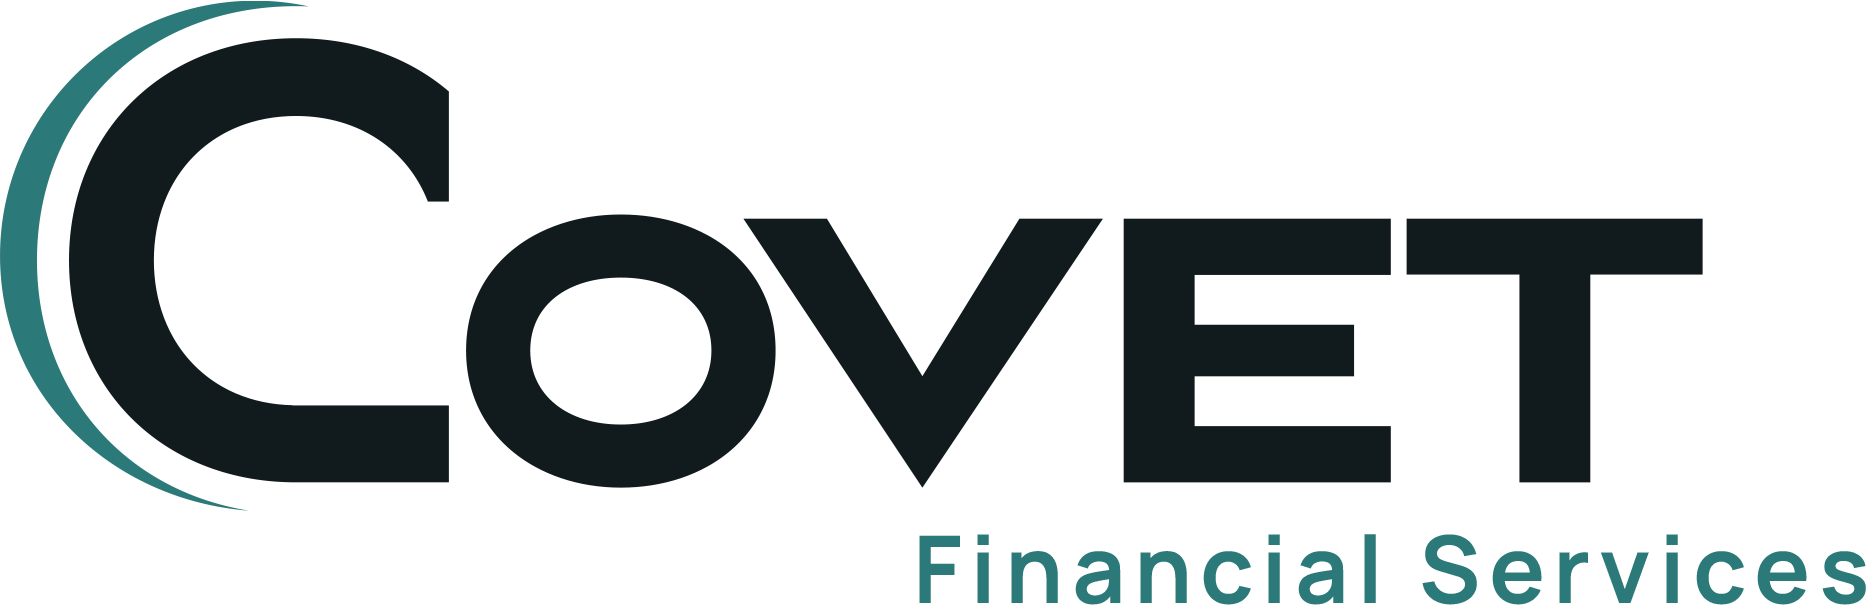 Covet Financial Services